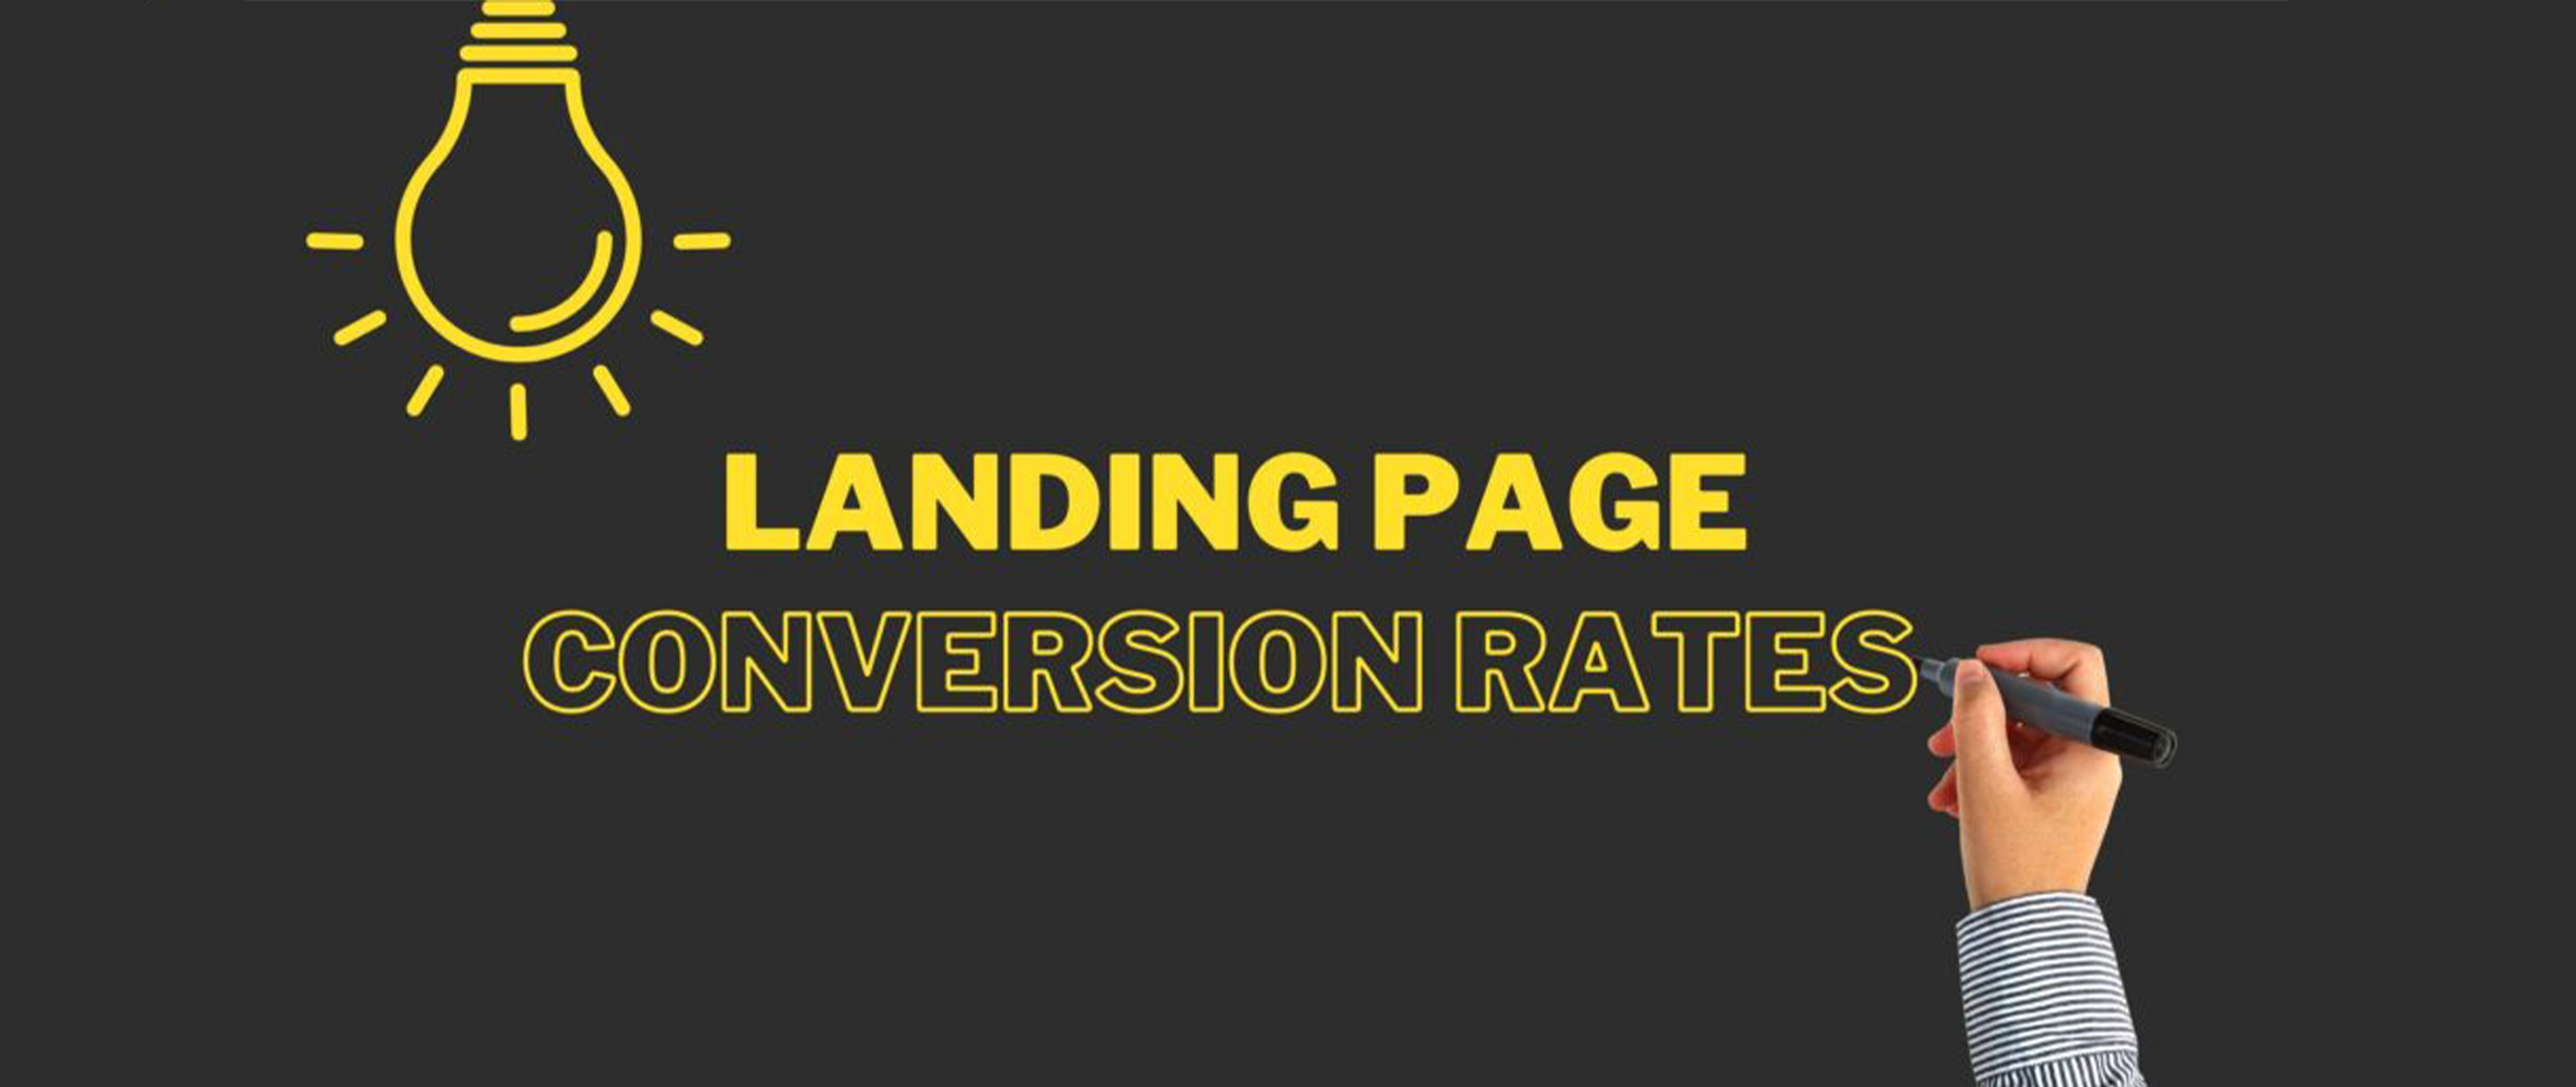 Tips To Improve Landing Page Conversion Rates